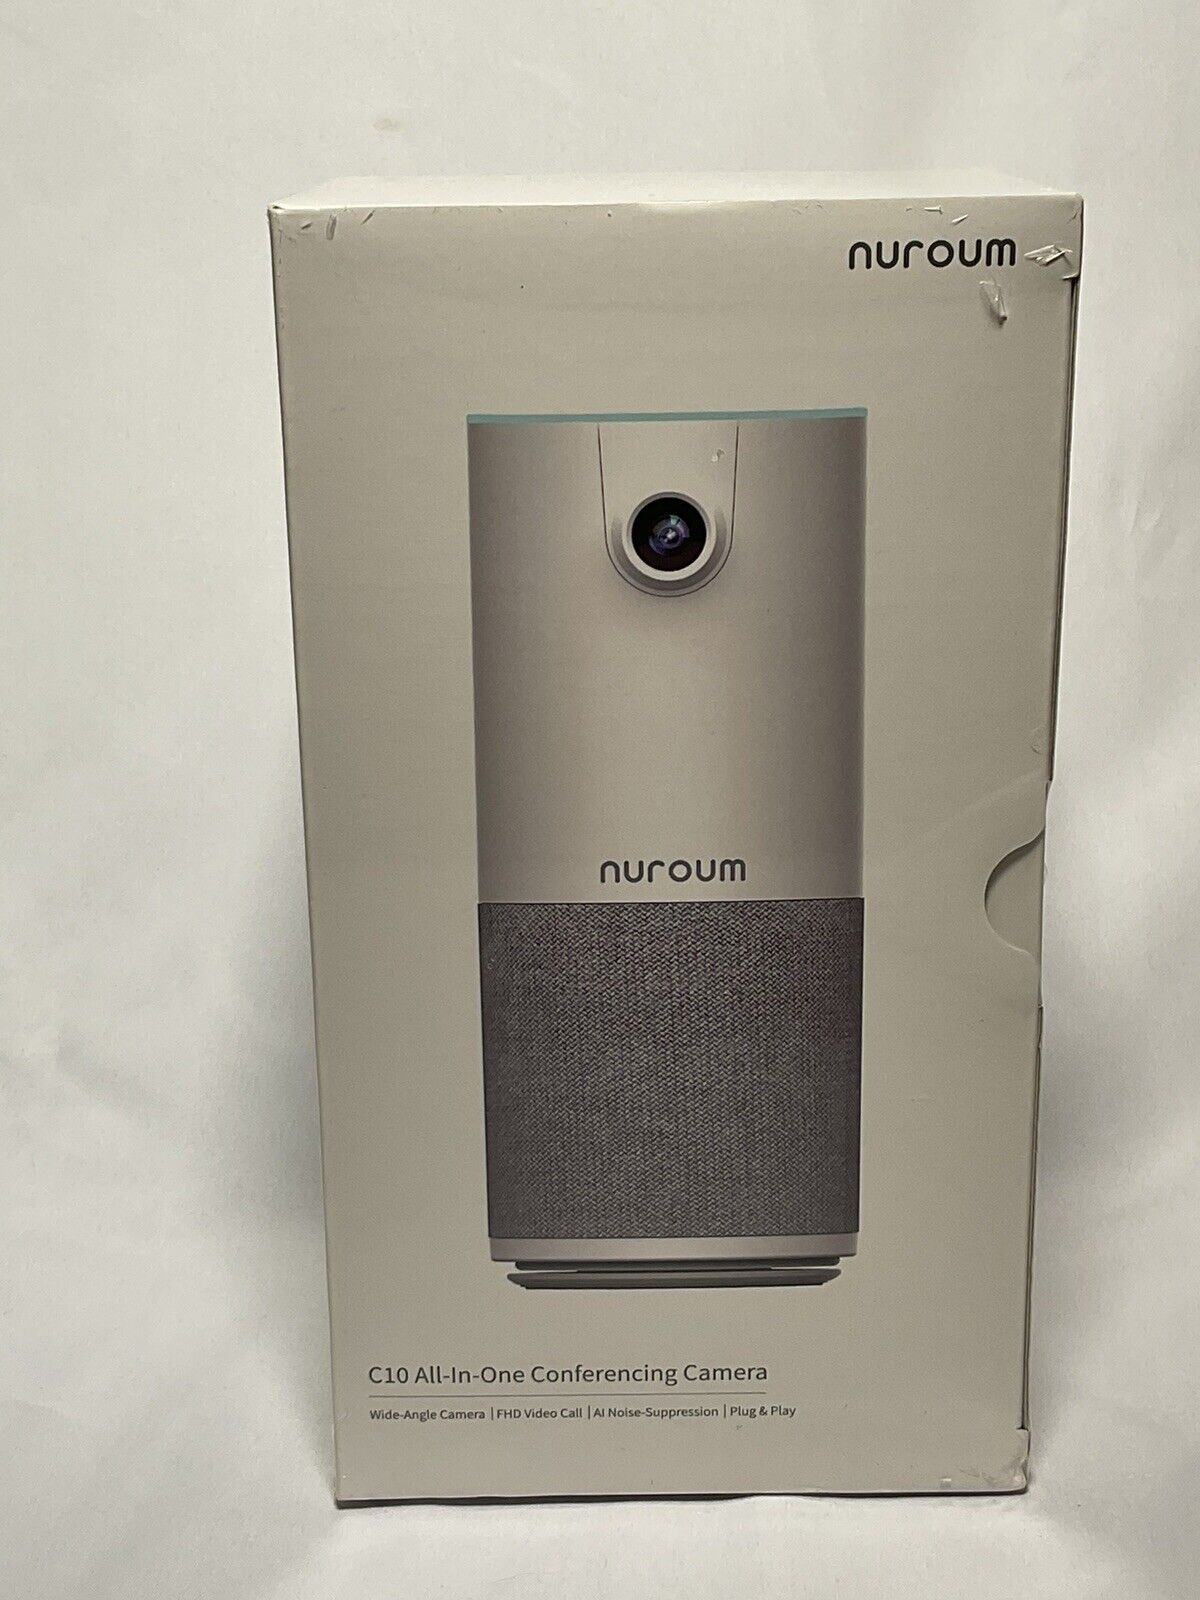 Nuroum C10 All-In-One Conferencing Camera brand NEW in box.